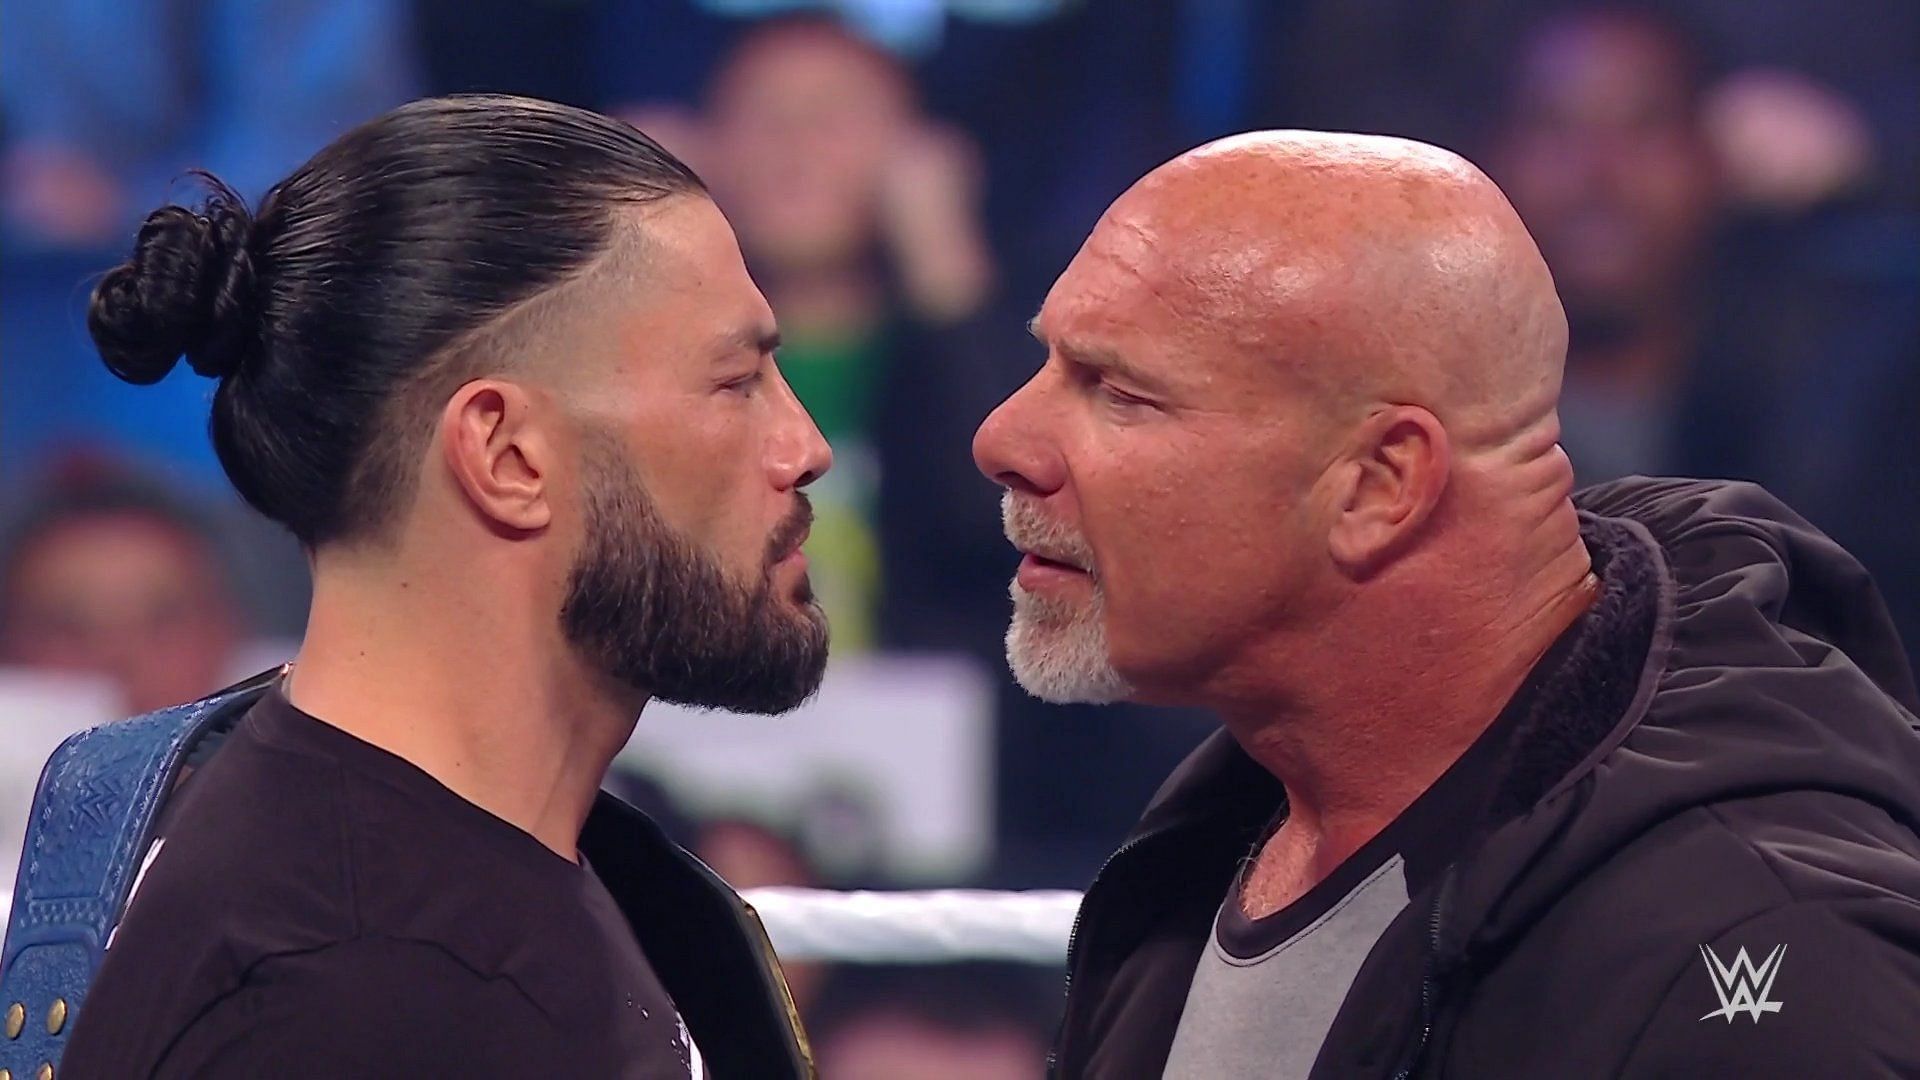 Goldberg and Universal Champion Roman Reigns go face-to-face on WWE SmackDown